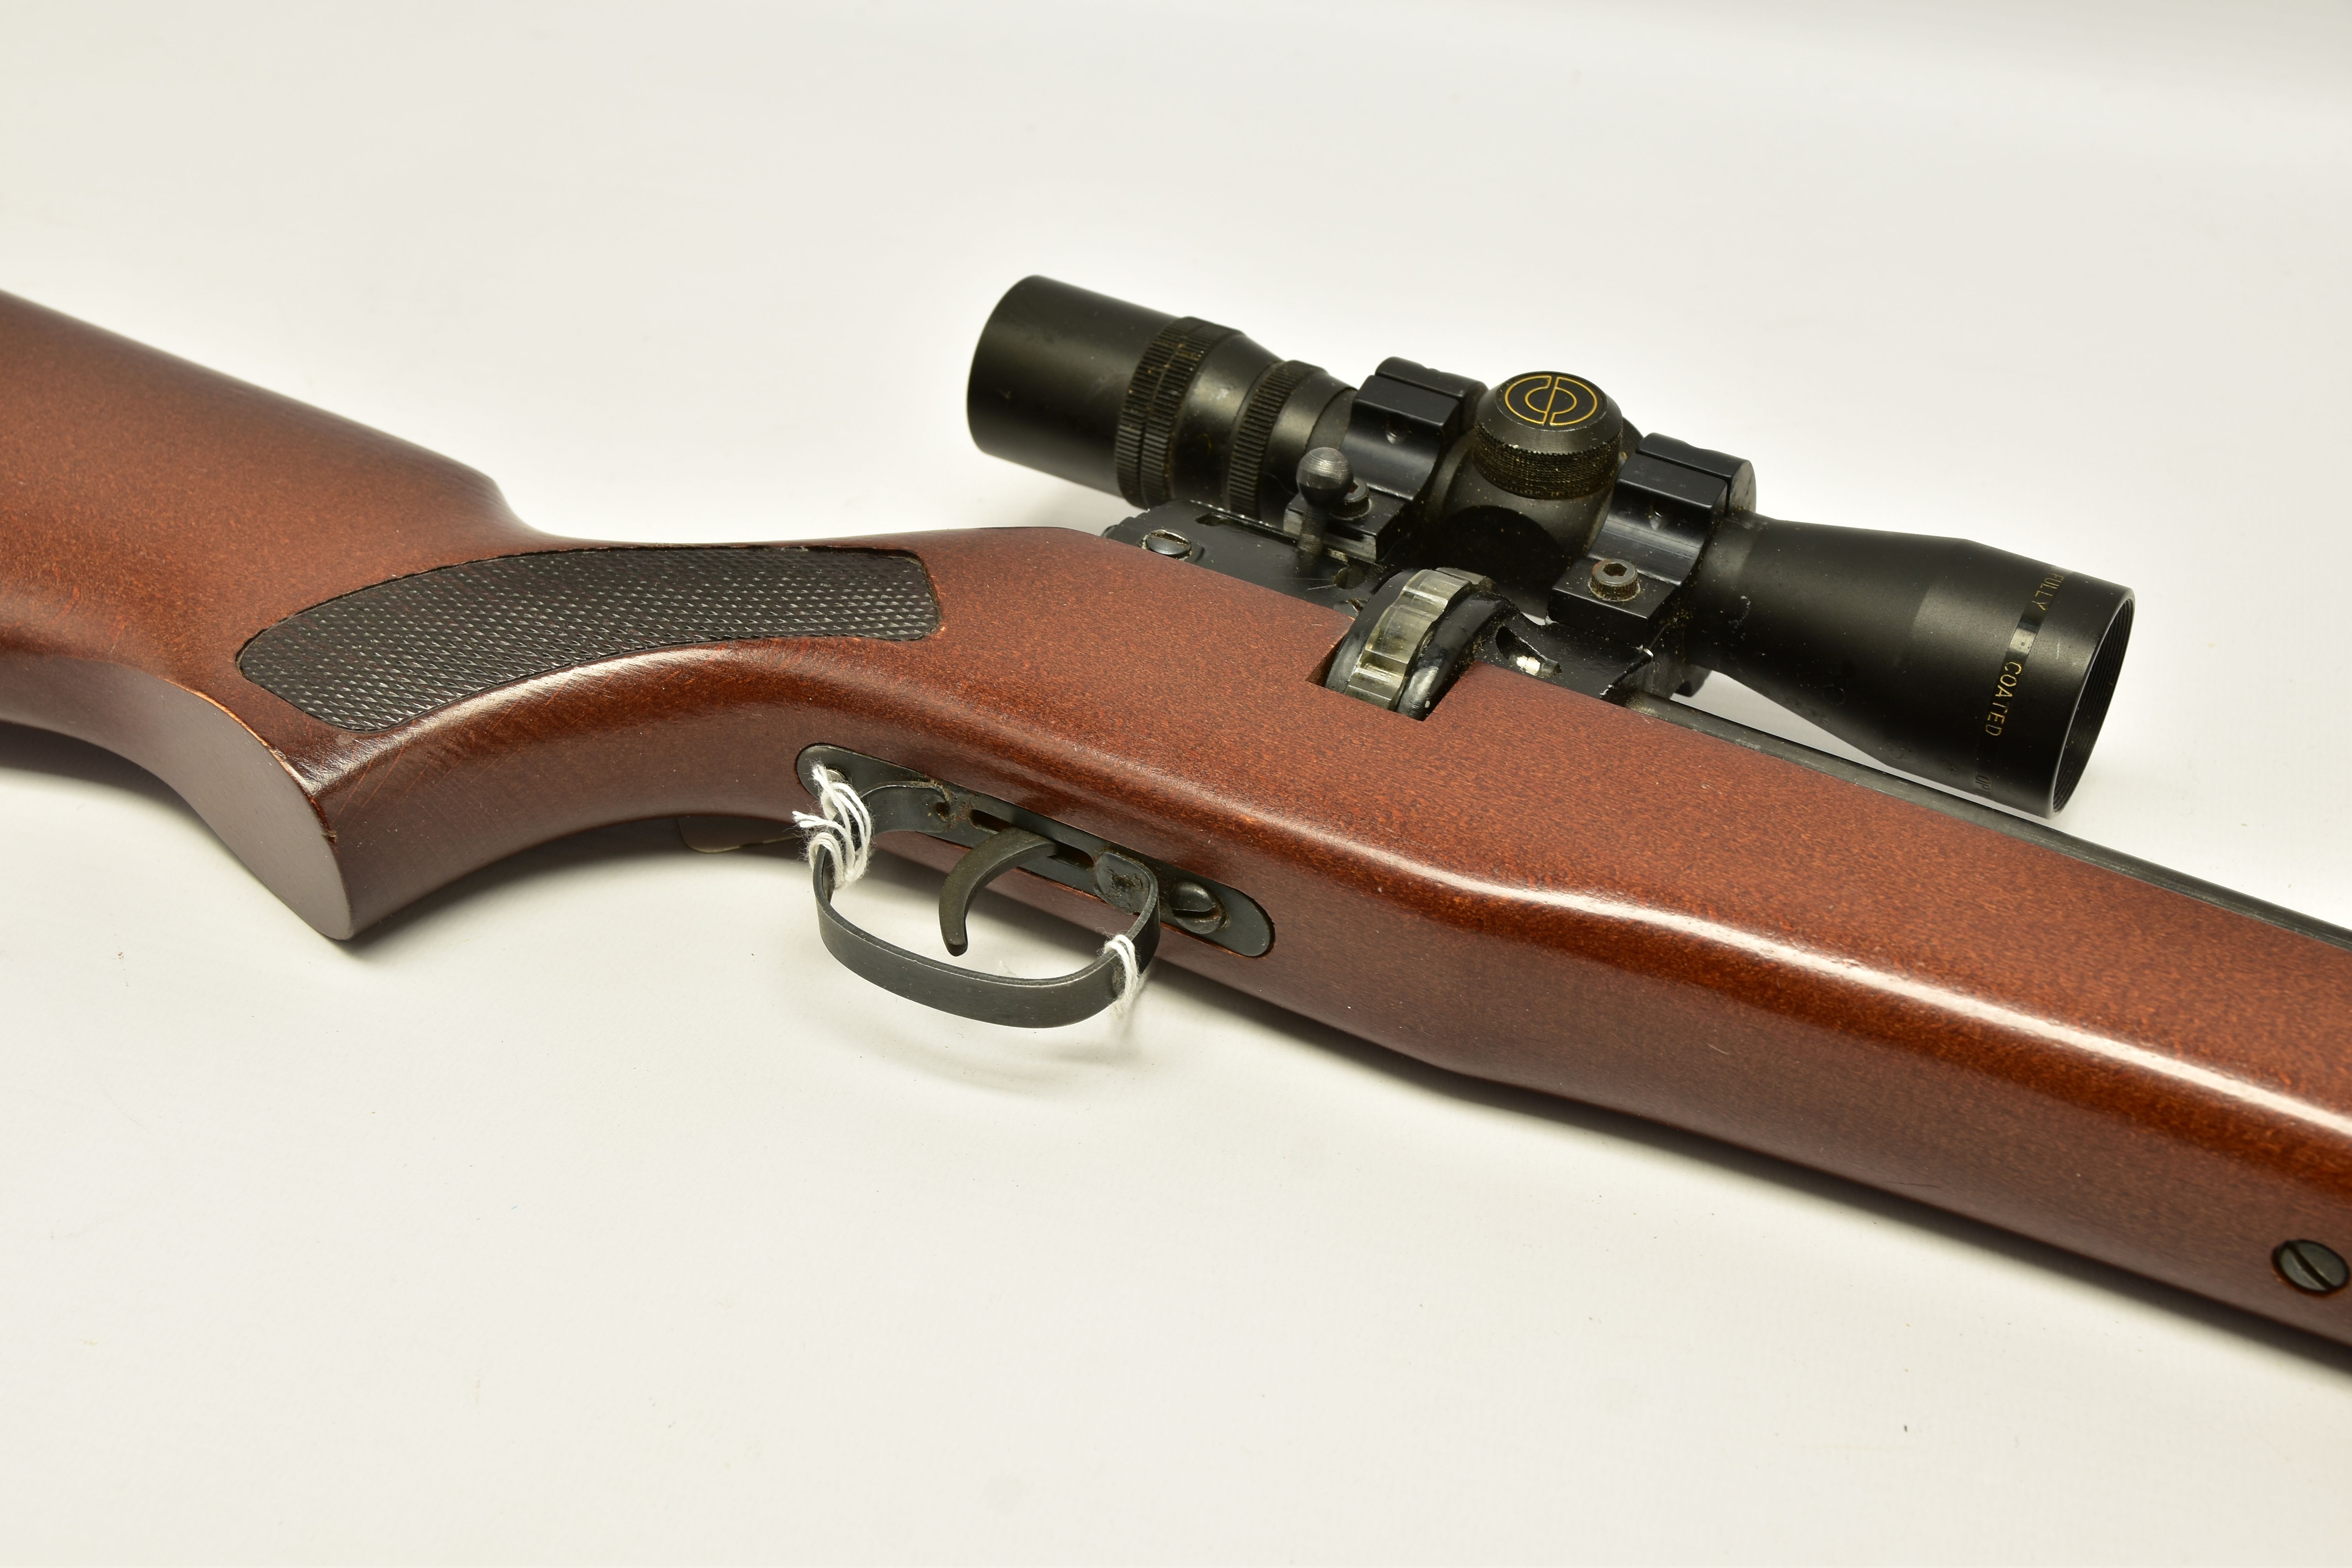 A .22 '' ROTARY MAGAZINE PUMP UP AIR RIFLE fitted with a beech stock, in working order and excellent - Image 5 of 9